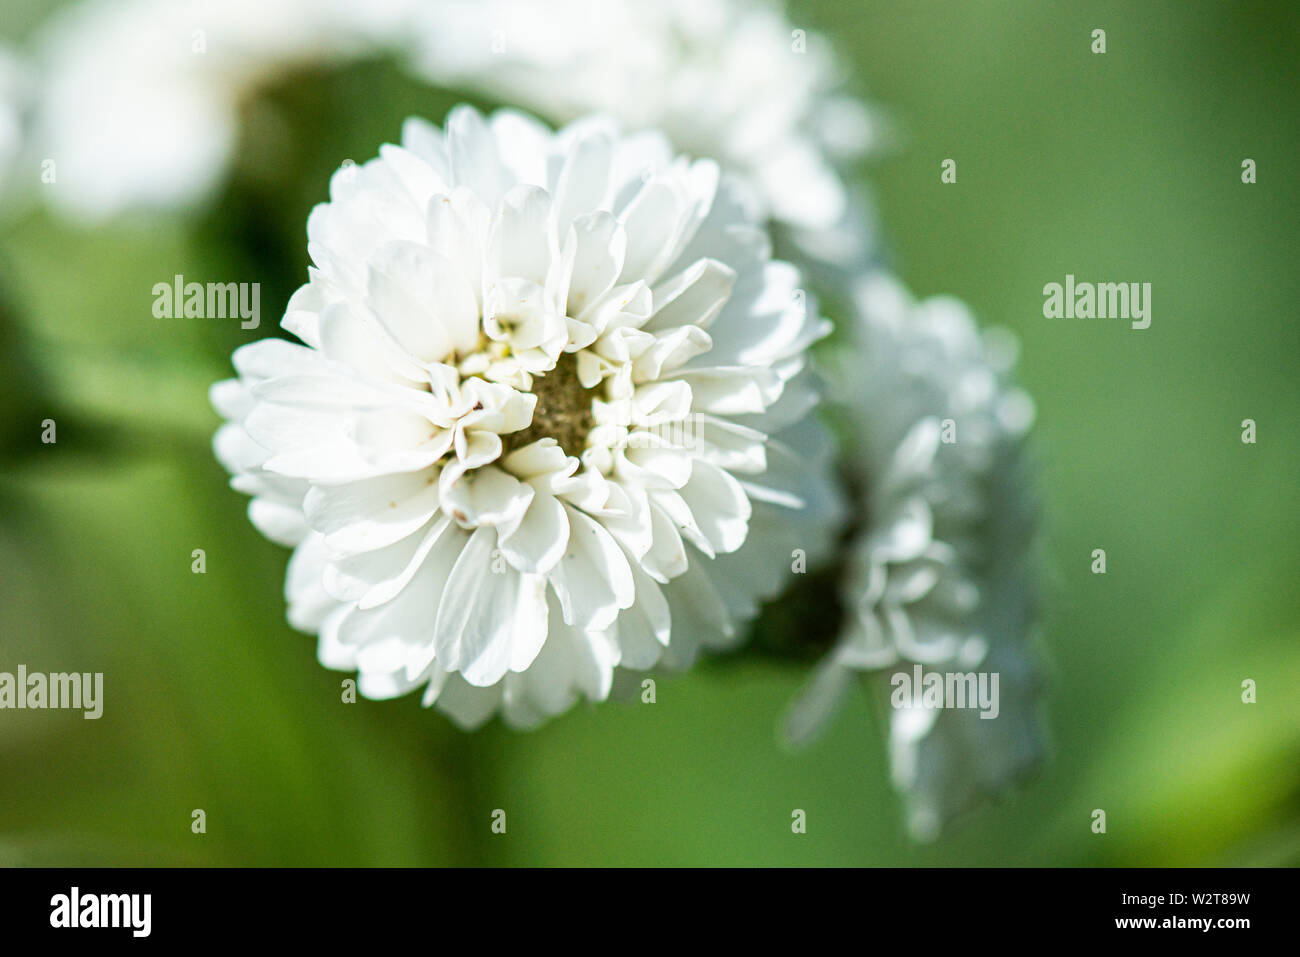 The flower of a sneezewort 'The Pearl' (Achillea ptarmica 'The Pearl ...